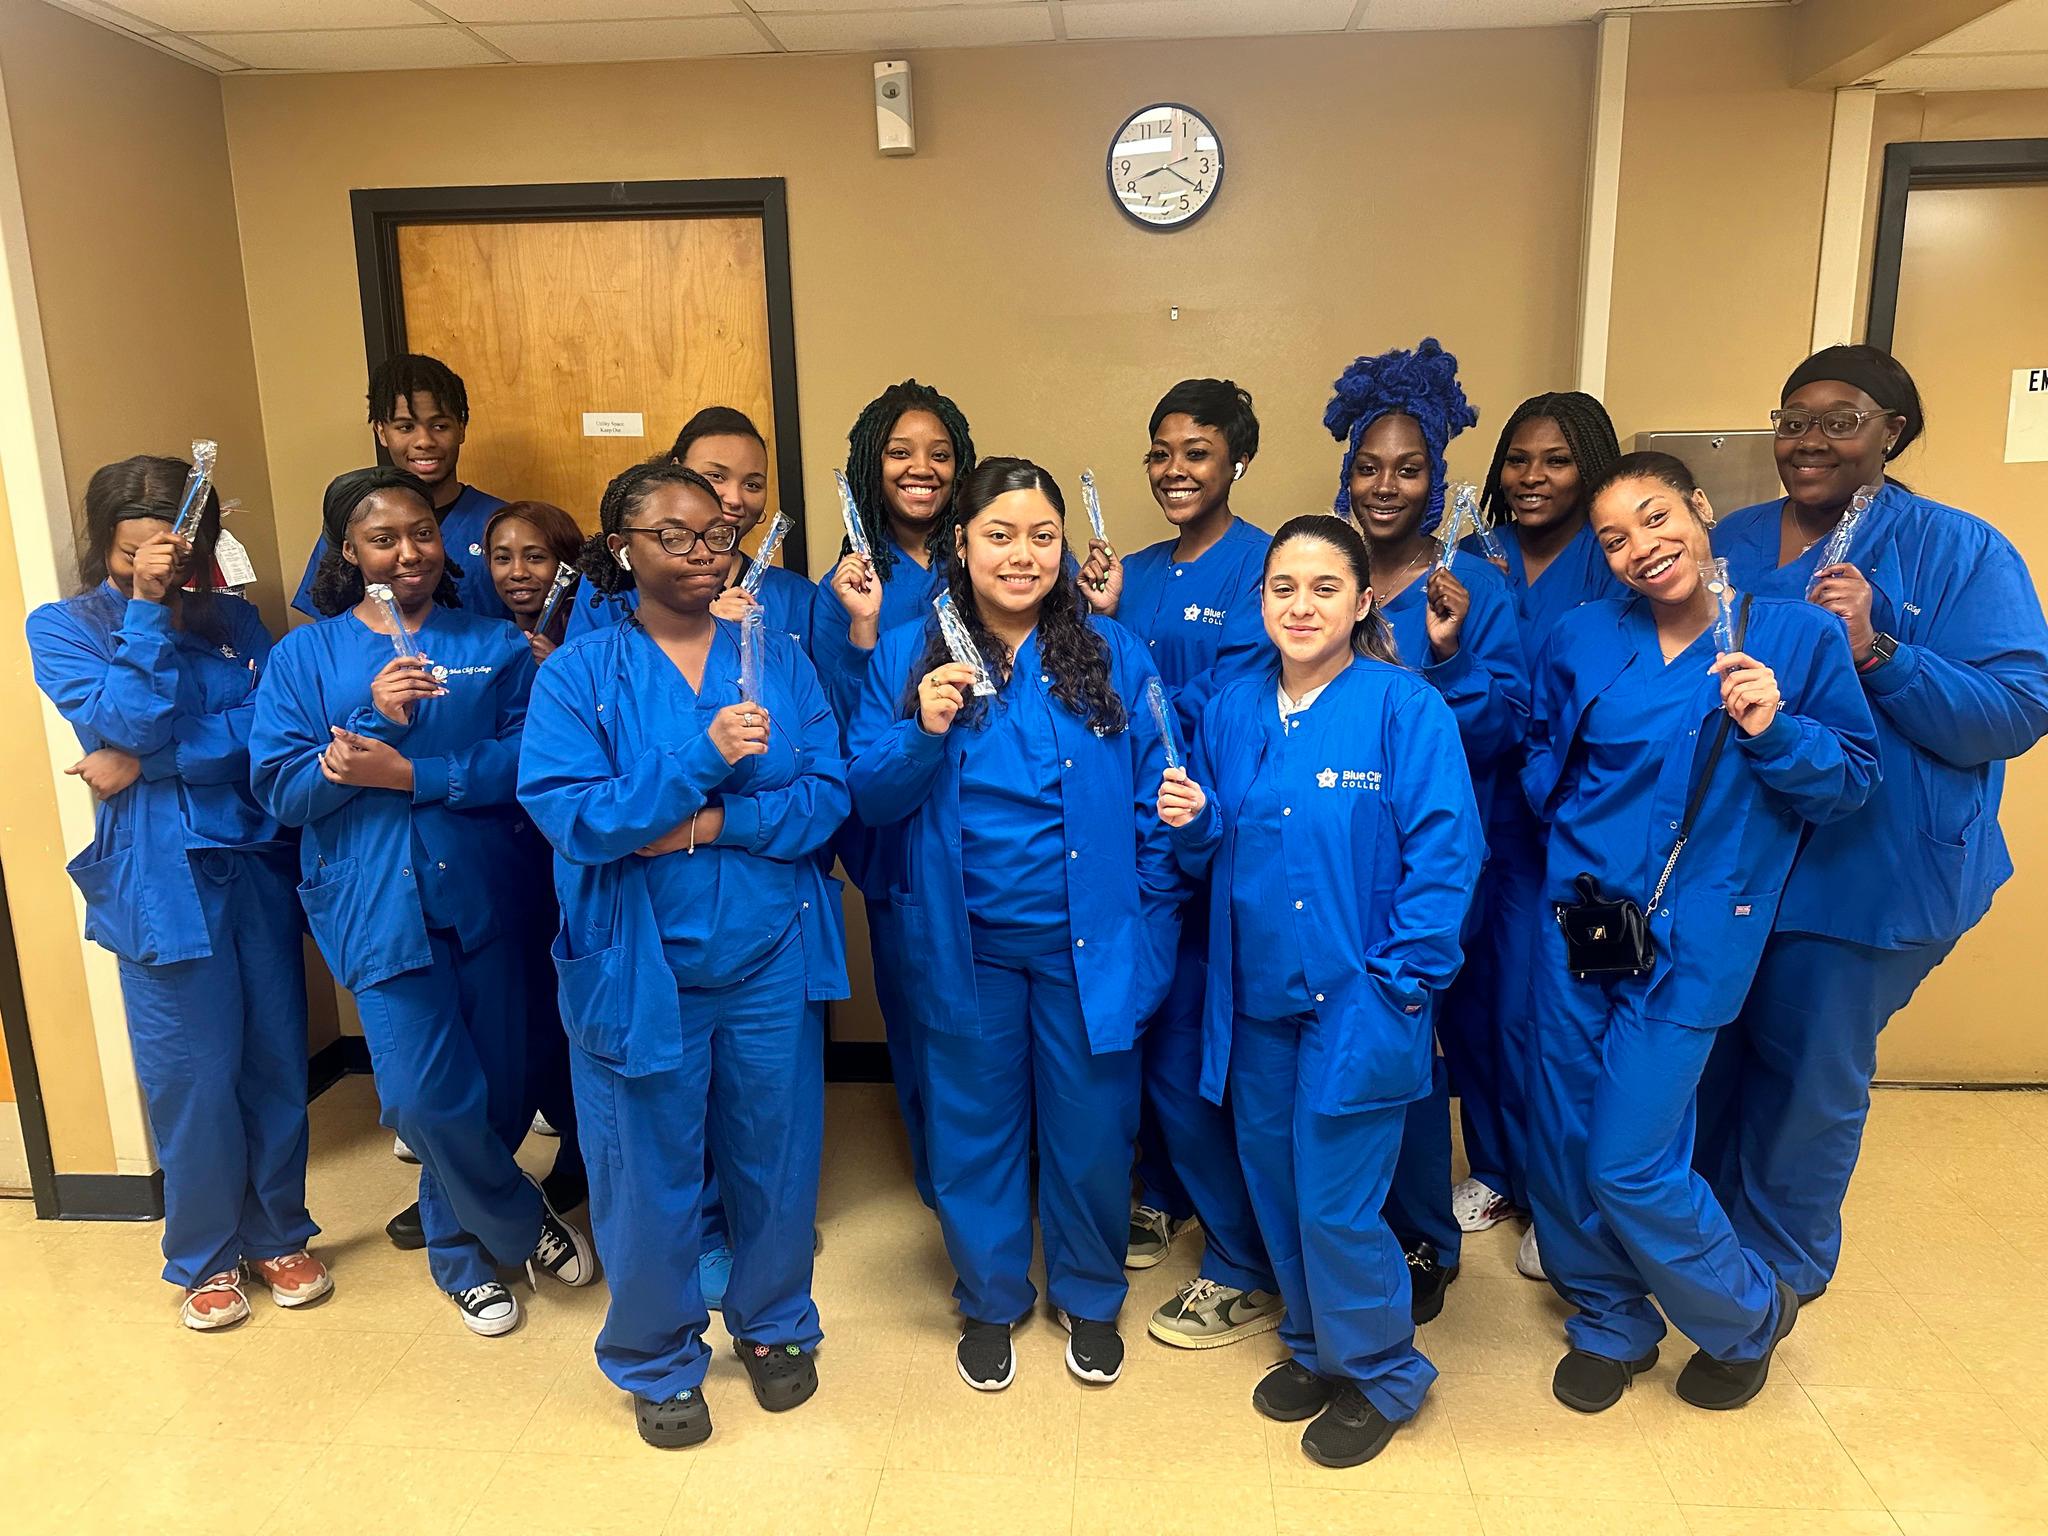 Our Dental Assisting students had a great time last week on "National Tooth Fairy Day" talking to kids about the benefits of Dental Hygiene!